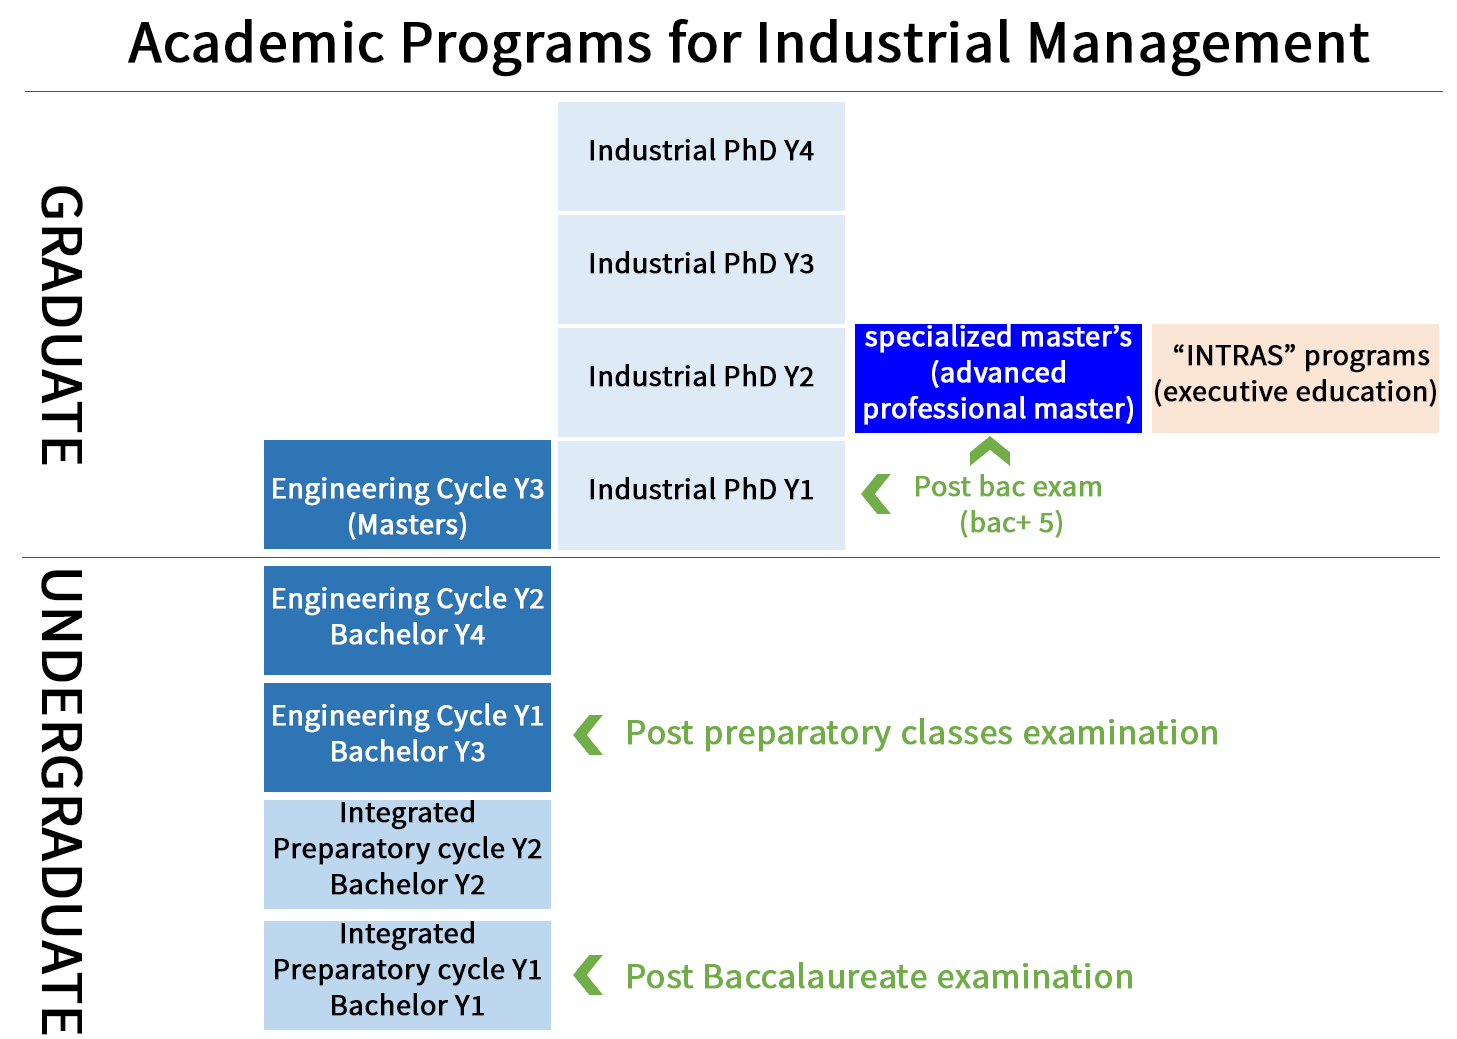 Academic Programs for Industrial Management